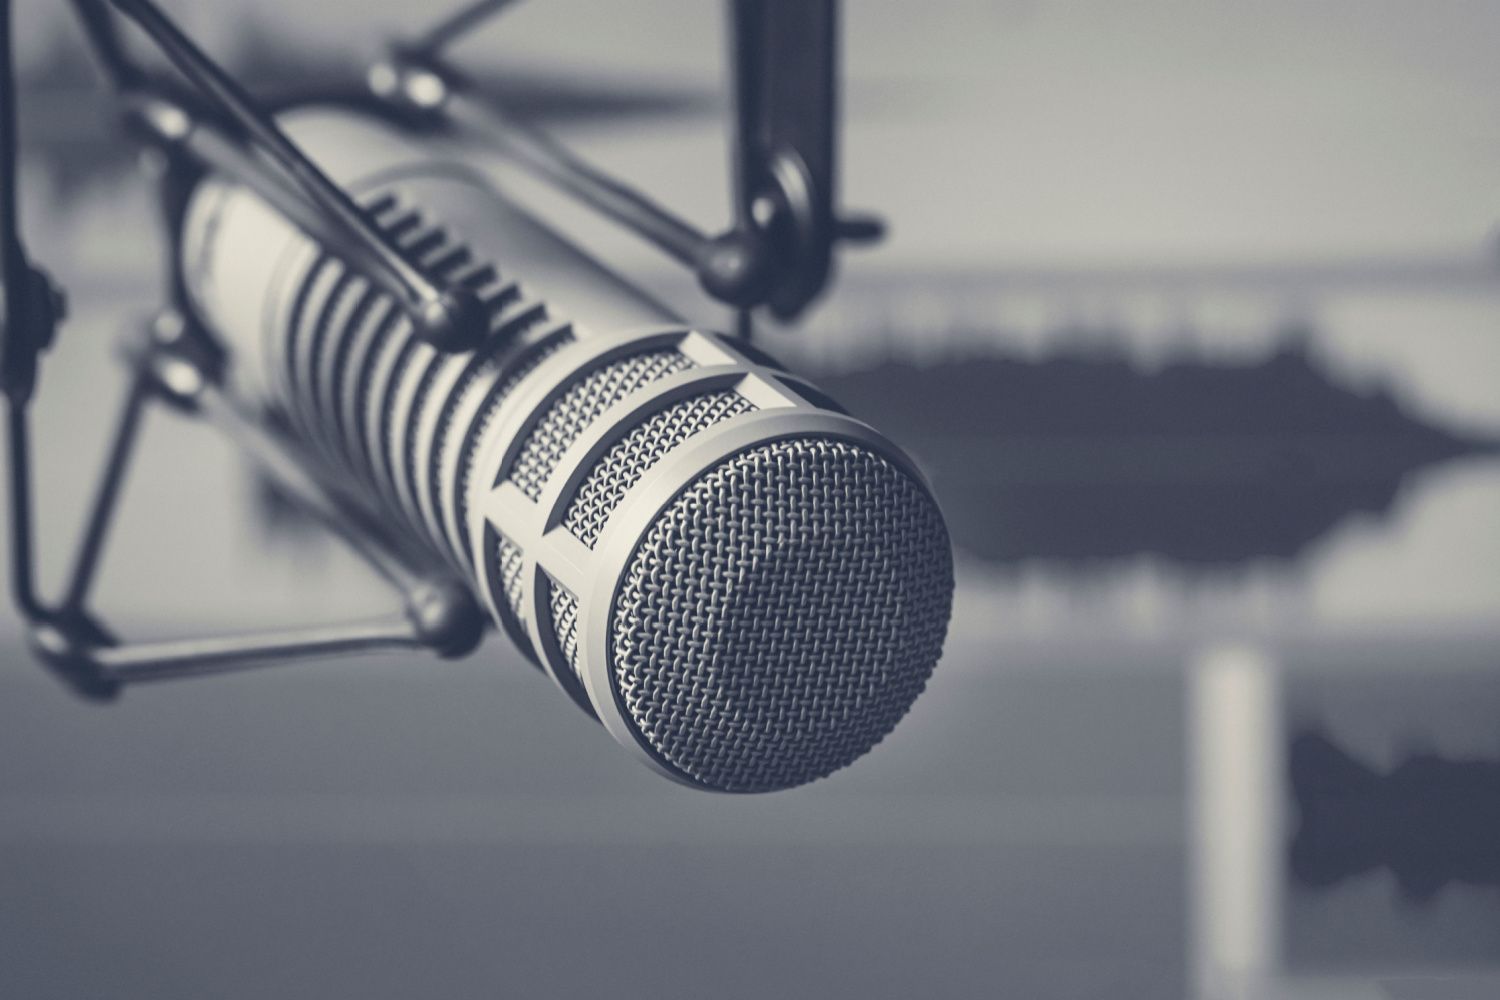  NY Fed Releases Podcast Series on Banking Culture Reform